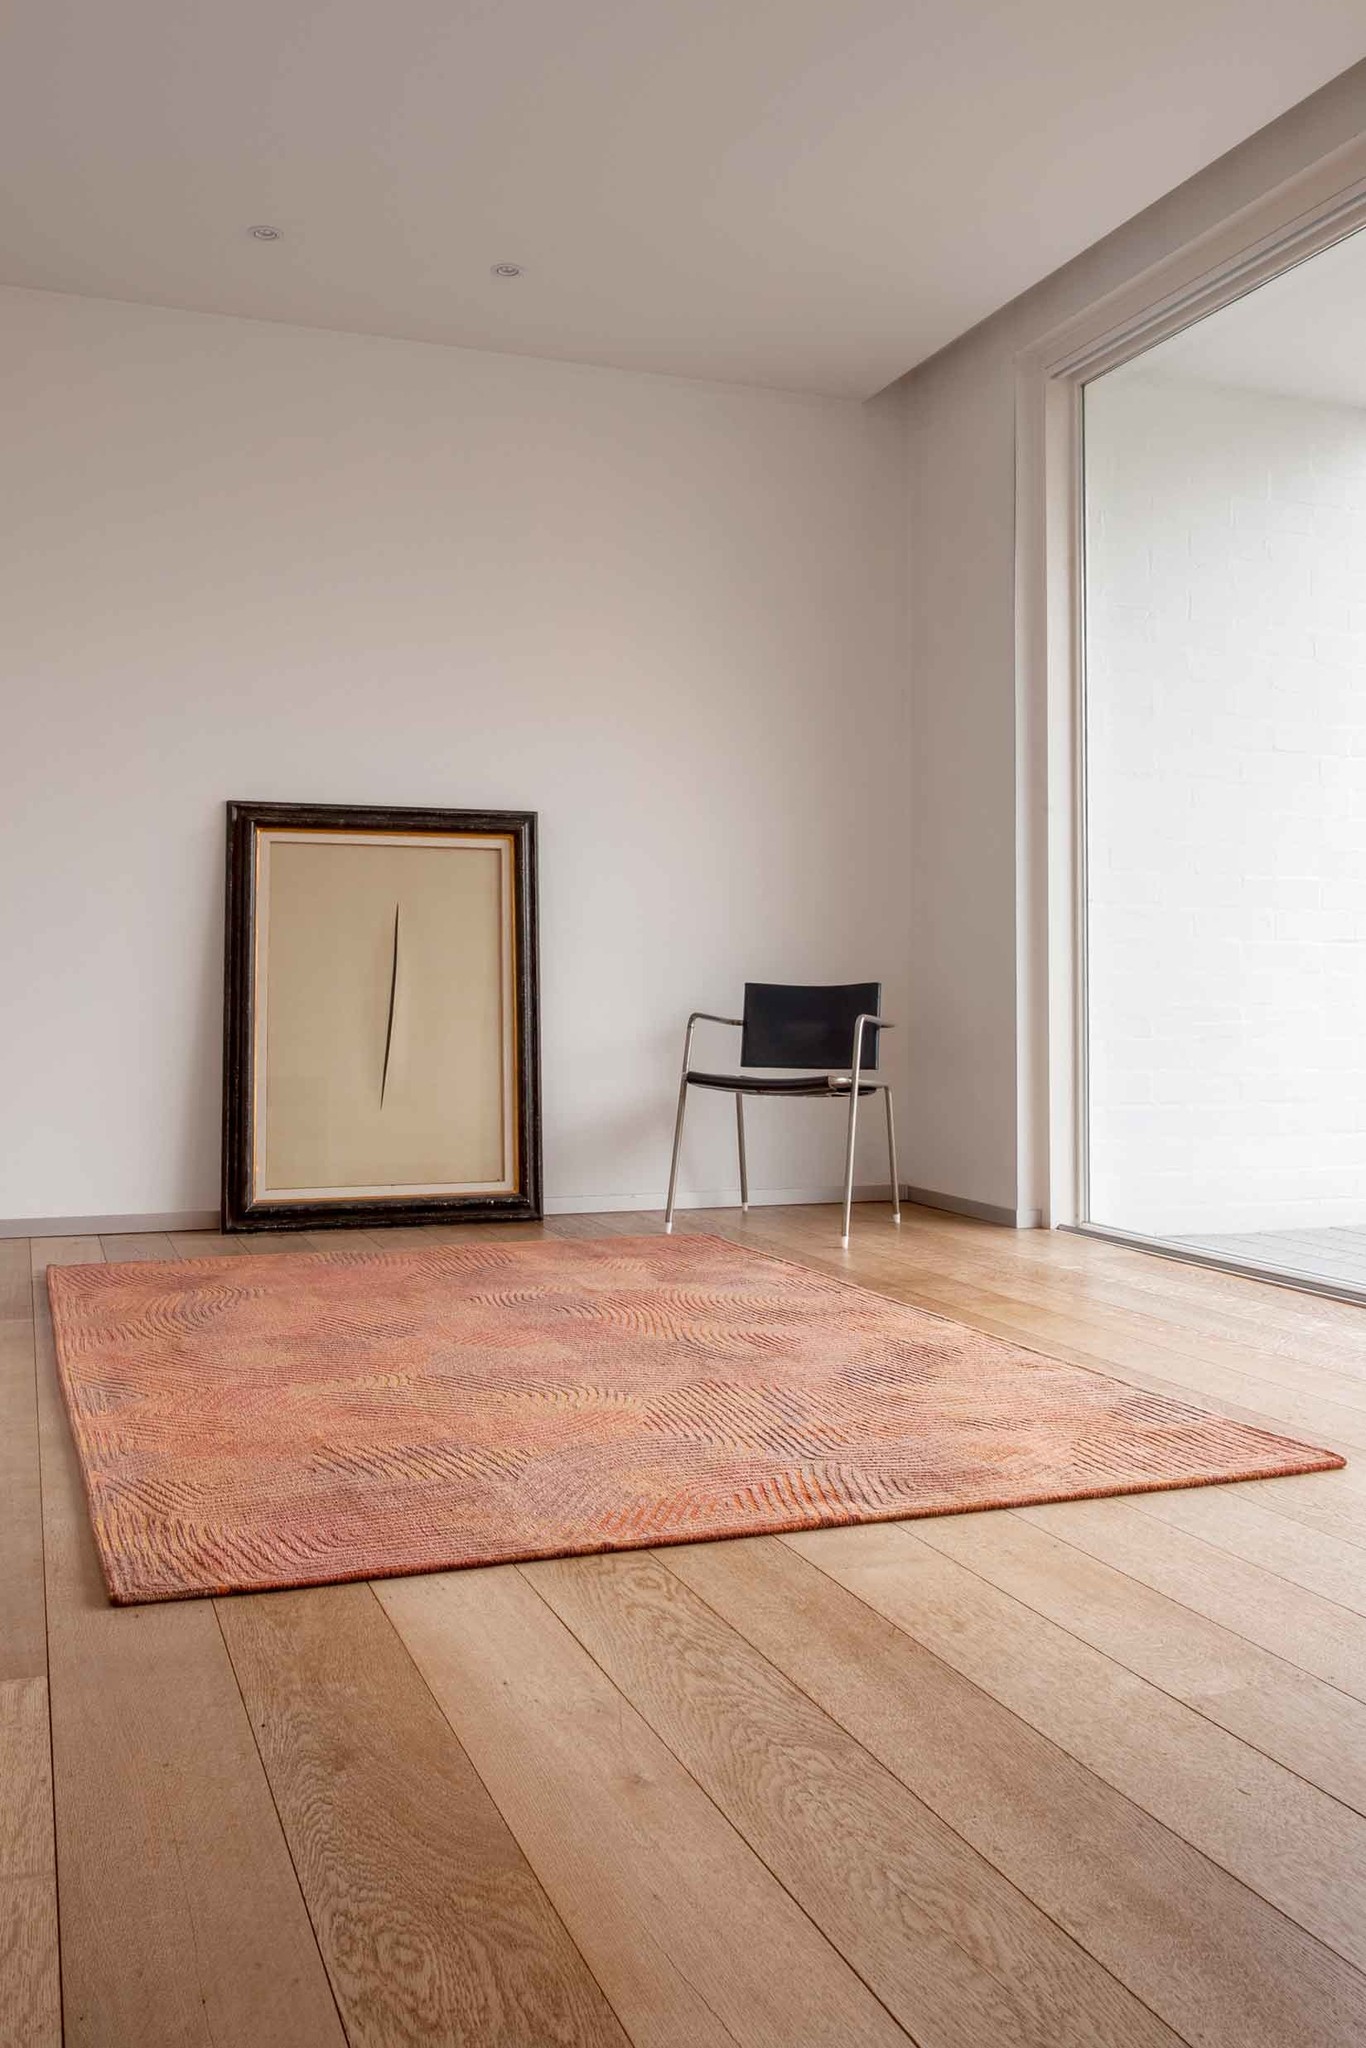 Brown Waves Flatwoven Rug ☞ Size: 2' 7" x 5' (80 x 150 cm)